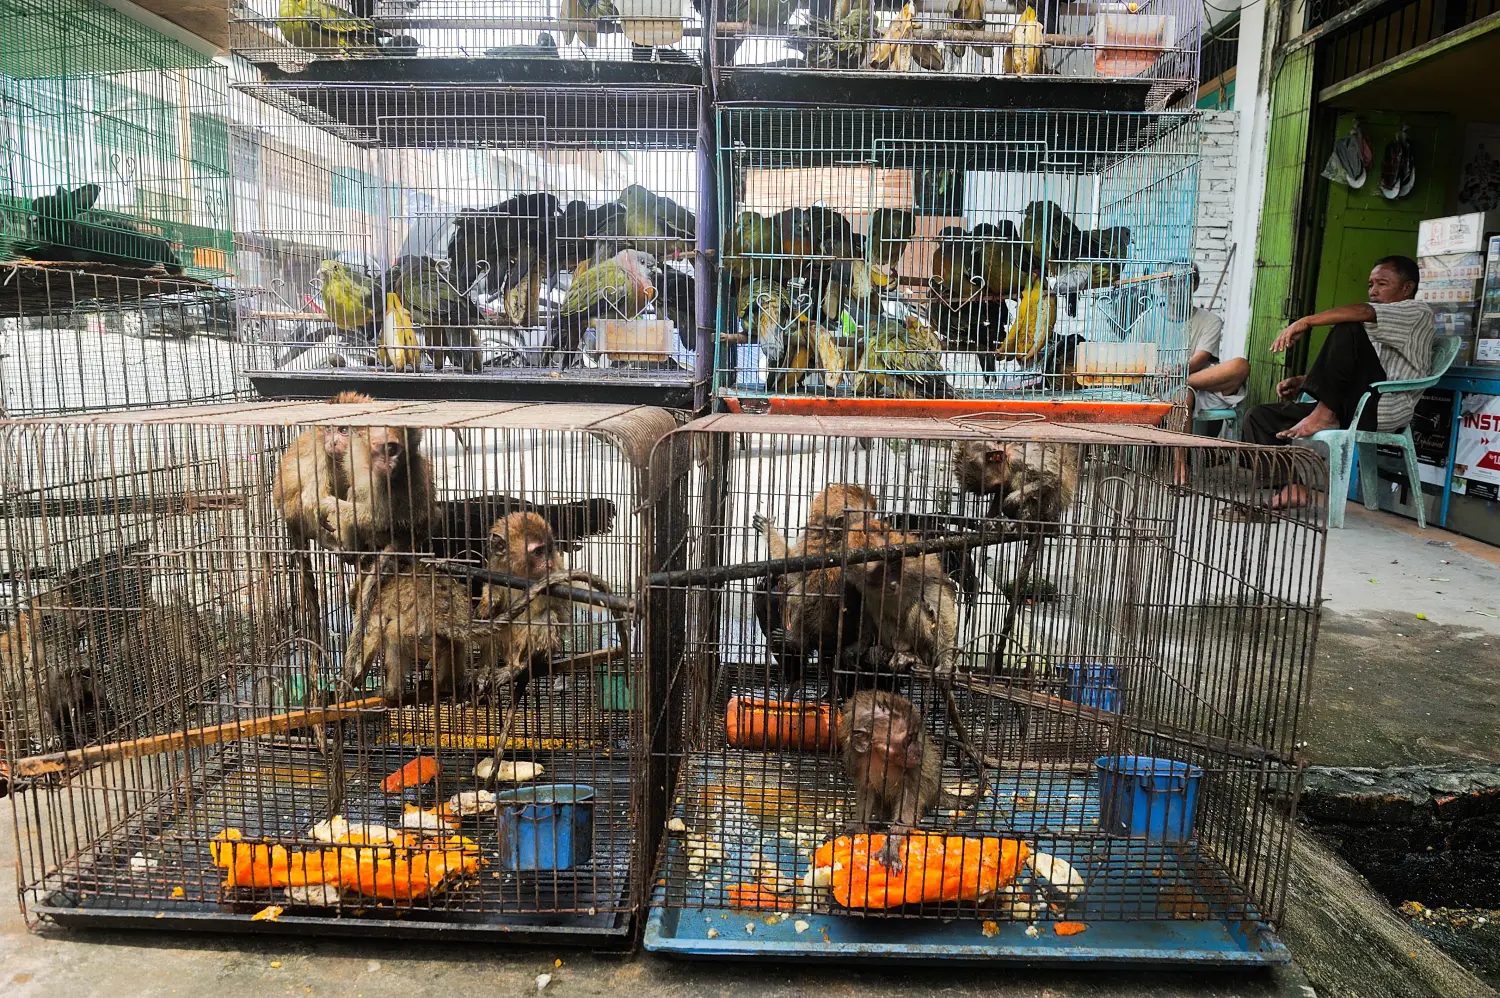 Macaques seen inside the cages during on sale at animals market store in Medan, North Sumatra province, Indonesia on February 22, 2020. Topeng monyet or the monkey mask is a show using monkeys. In some regions of Indonesia this performance is no longer allowed because it is considered torture of animals. Photo by Sutanta Aditya/ABACAPRESS.COM